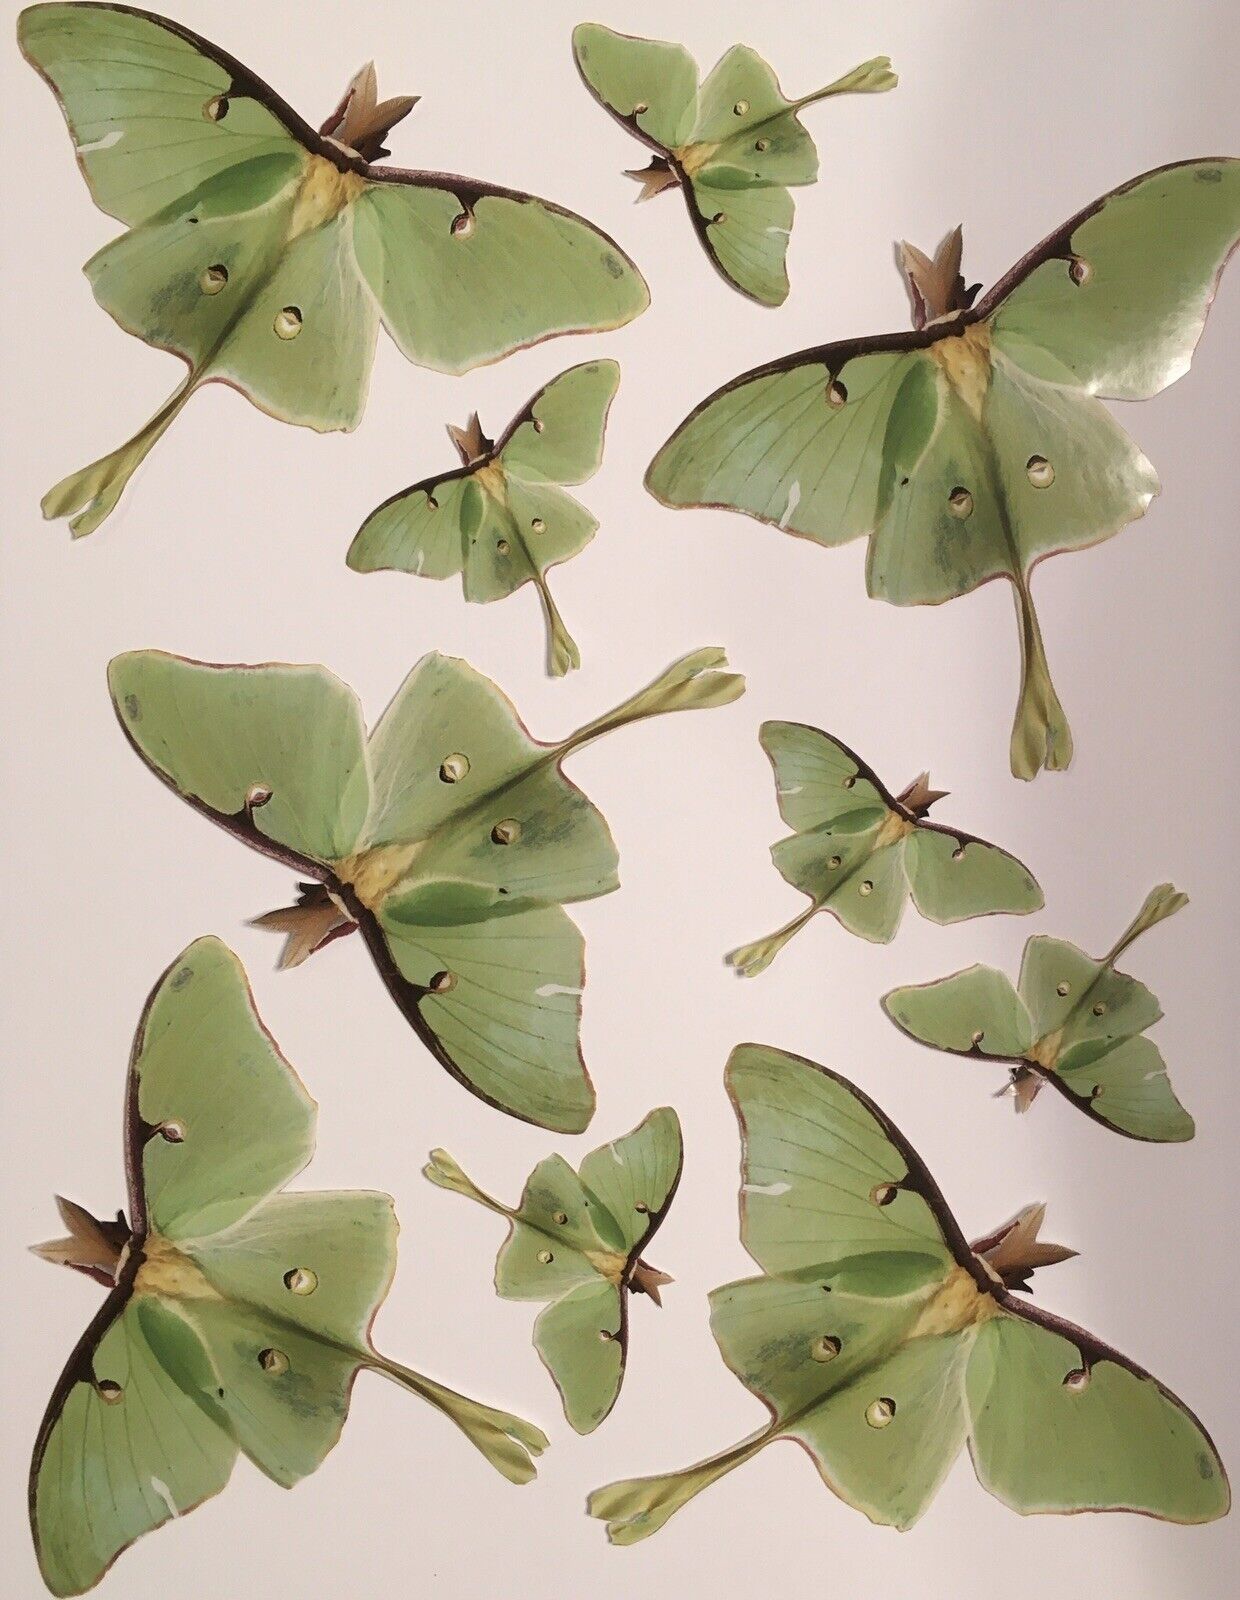 Luna Moth Stickers 10 Life-like Homemade Photograph Insect Bug 